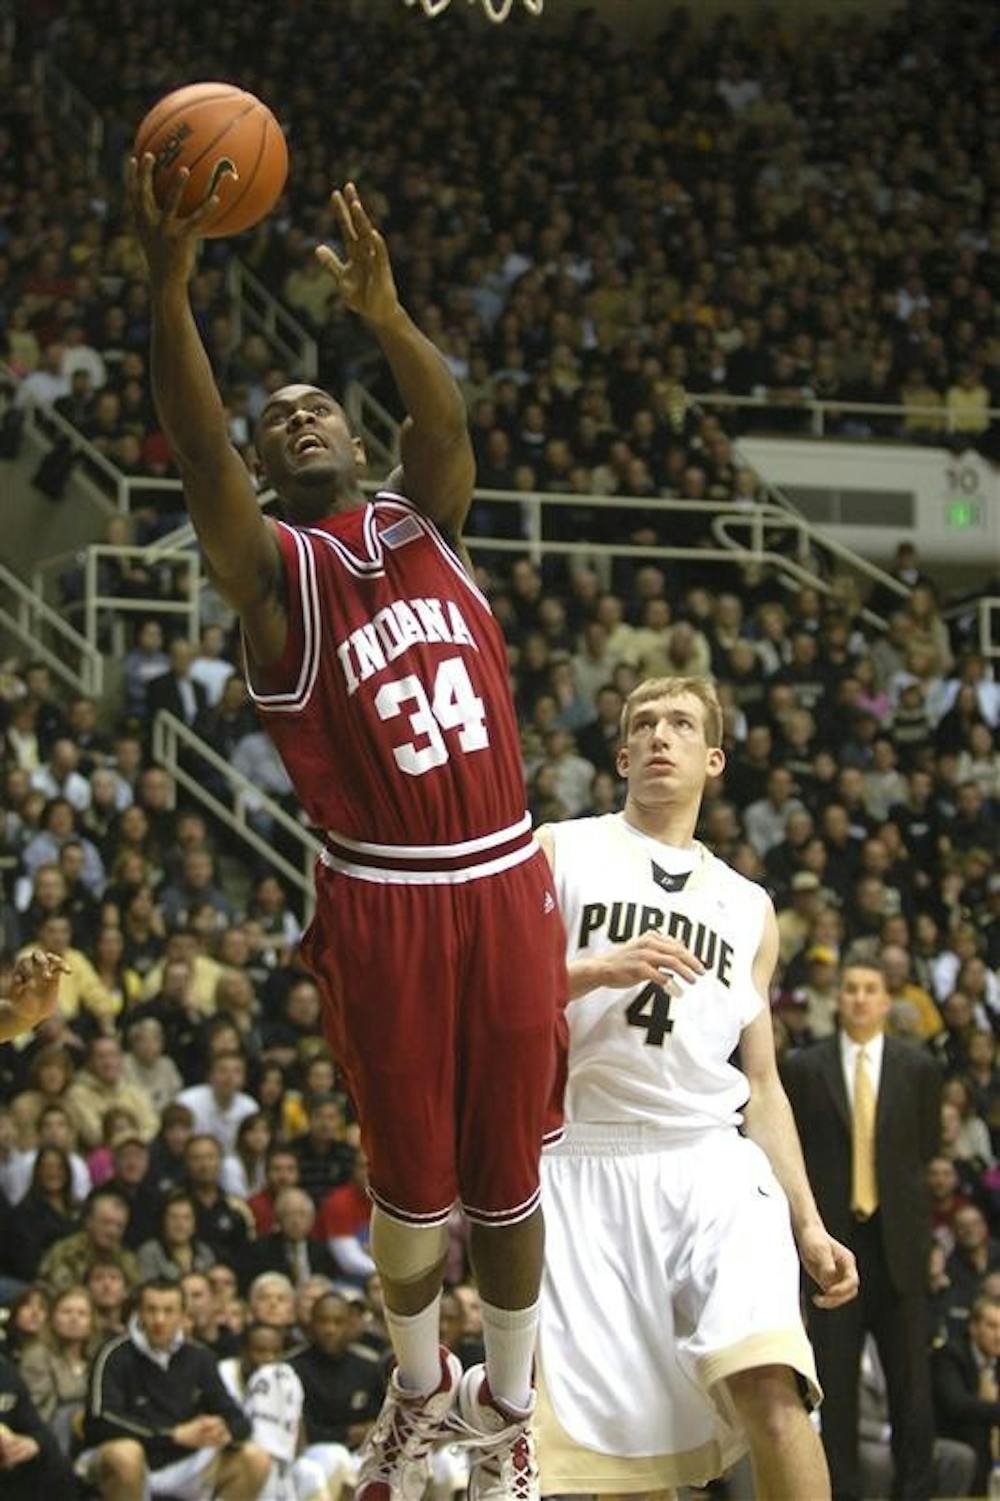 IU forward Malik Story tries to put in a layup over Purdue's Chris Kramer. Story finished the 81-67 loss on the road with 9 points and 2 rebounds.